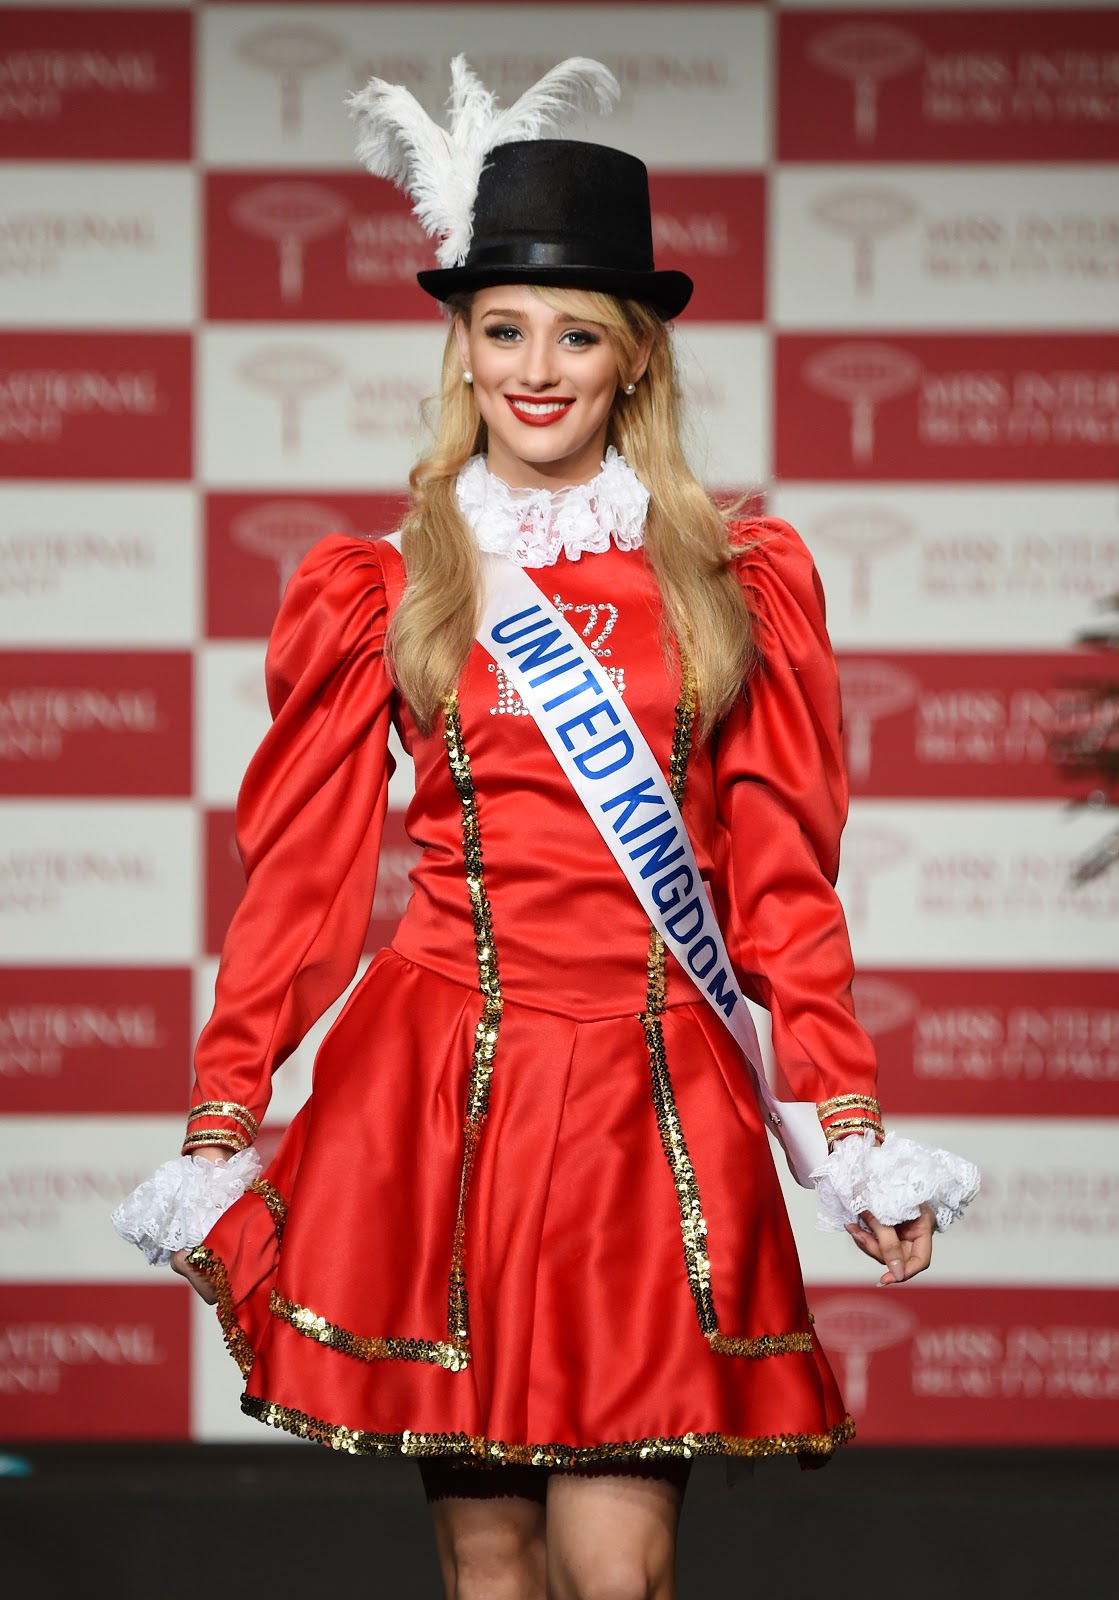 Miss International Beauty Pageant 2014 in Pictures - HD Photos1119 x 1600